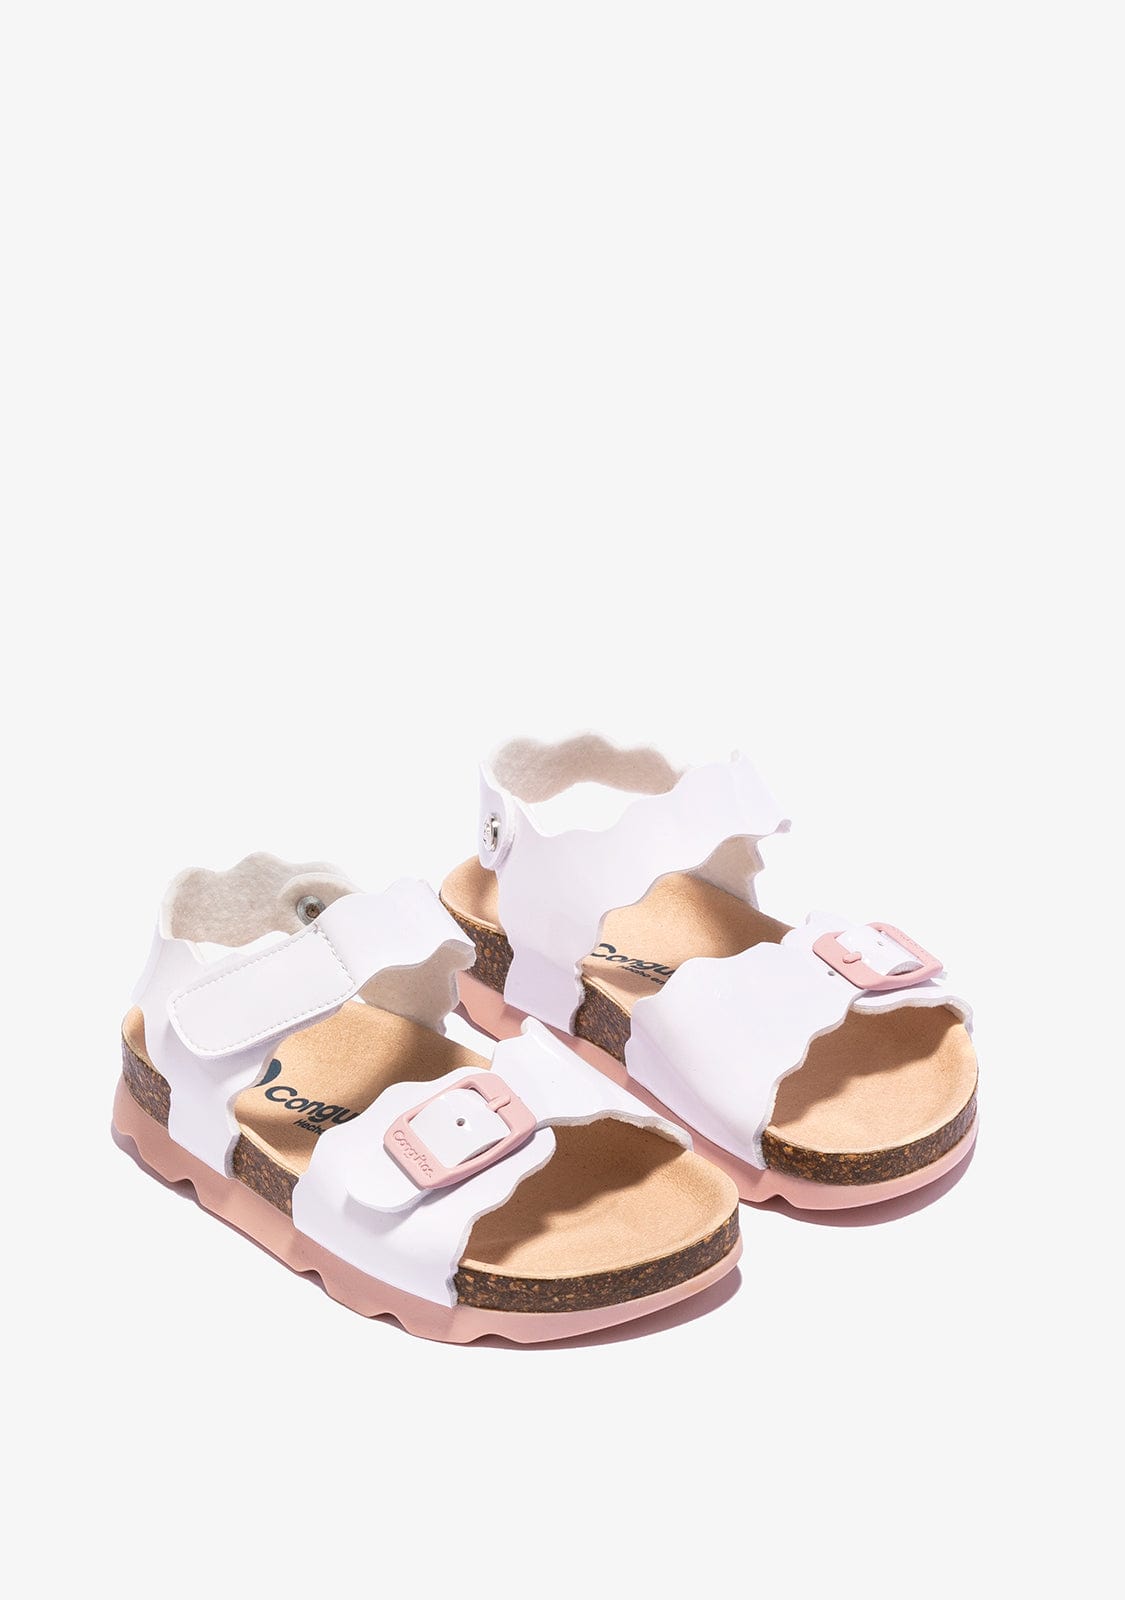 CONGUITOS Shoes Girl's White Bio Sandals Patent Leather